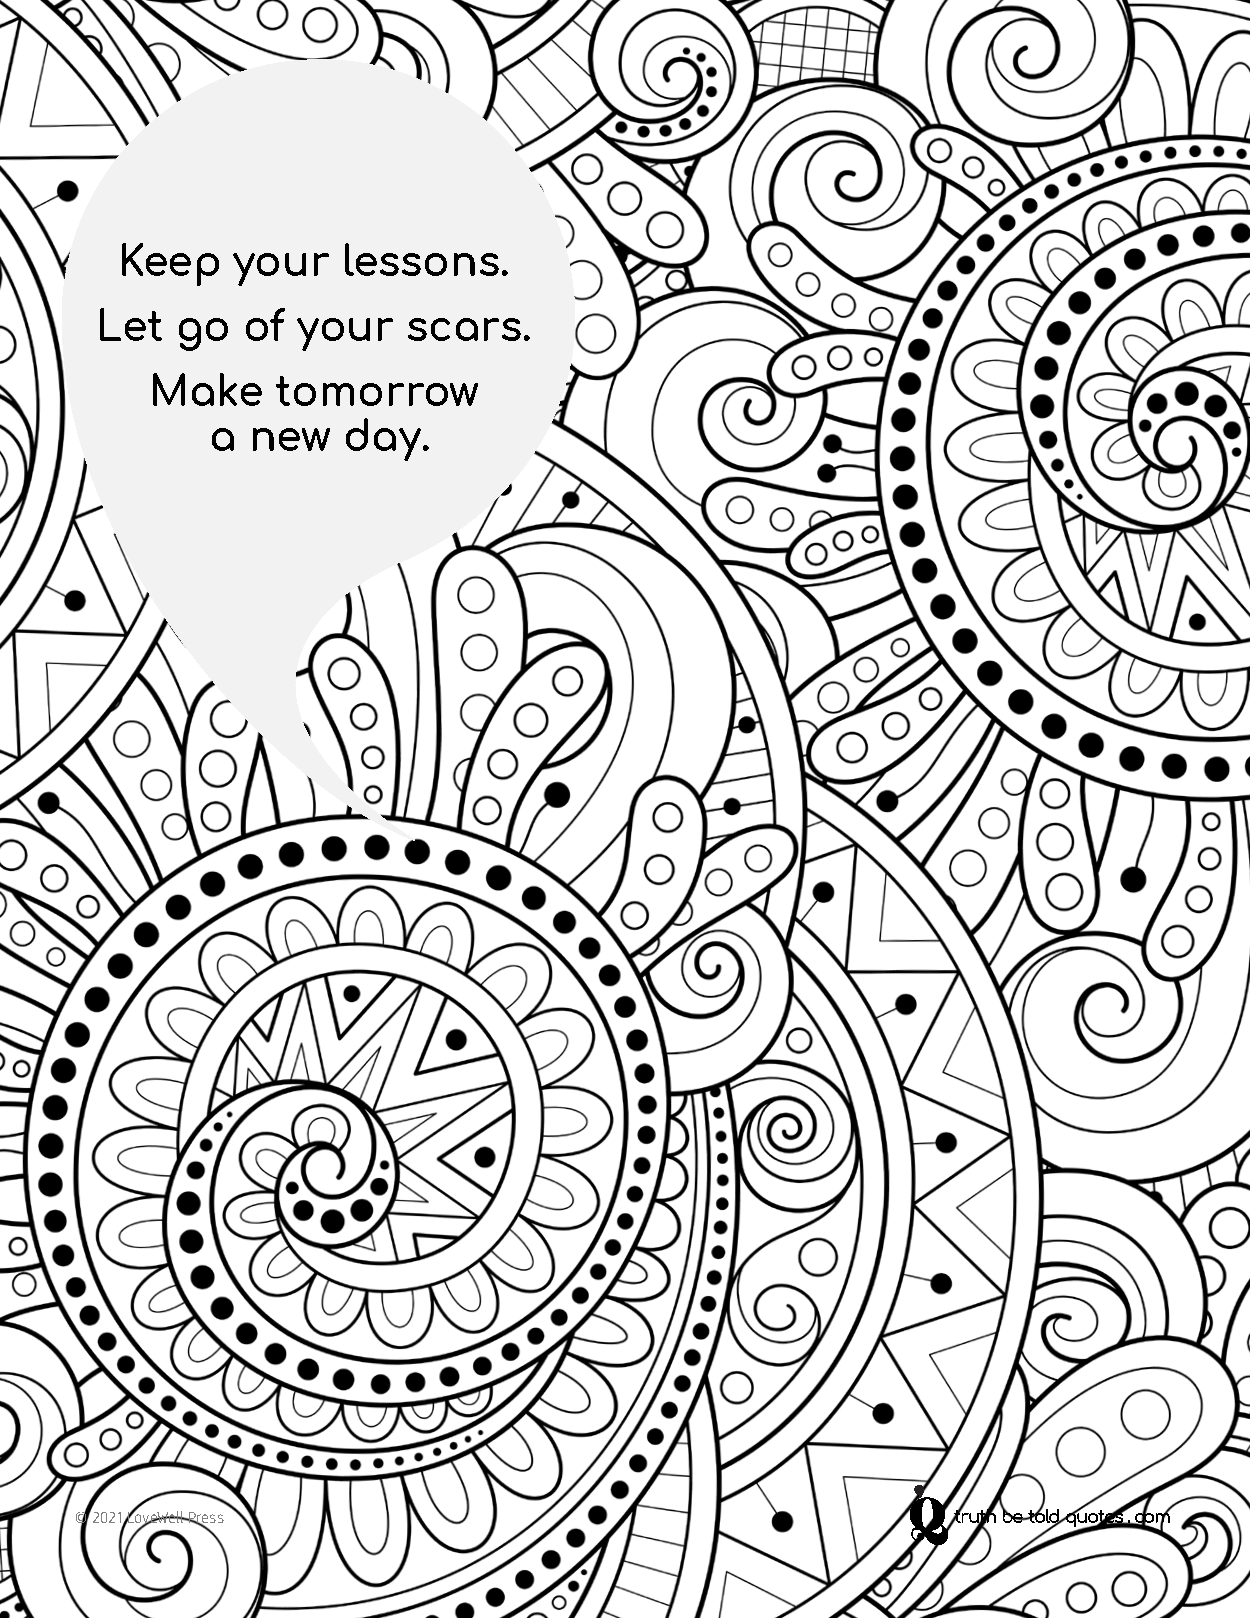 Free printable coloring page with quote about life and finding happiness, with images of zentangle style flowers